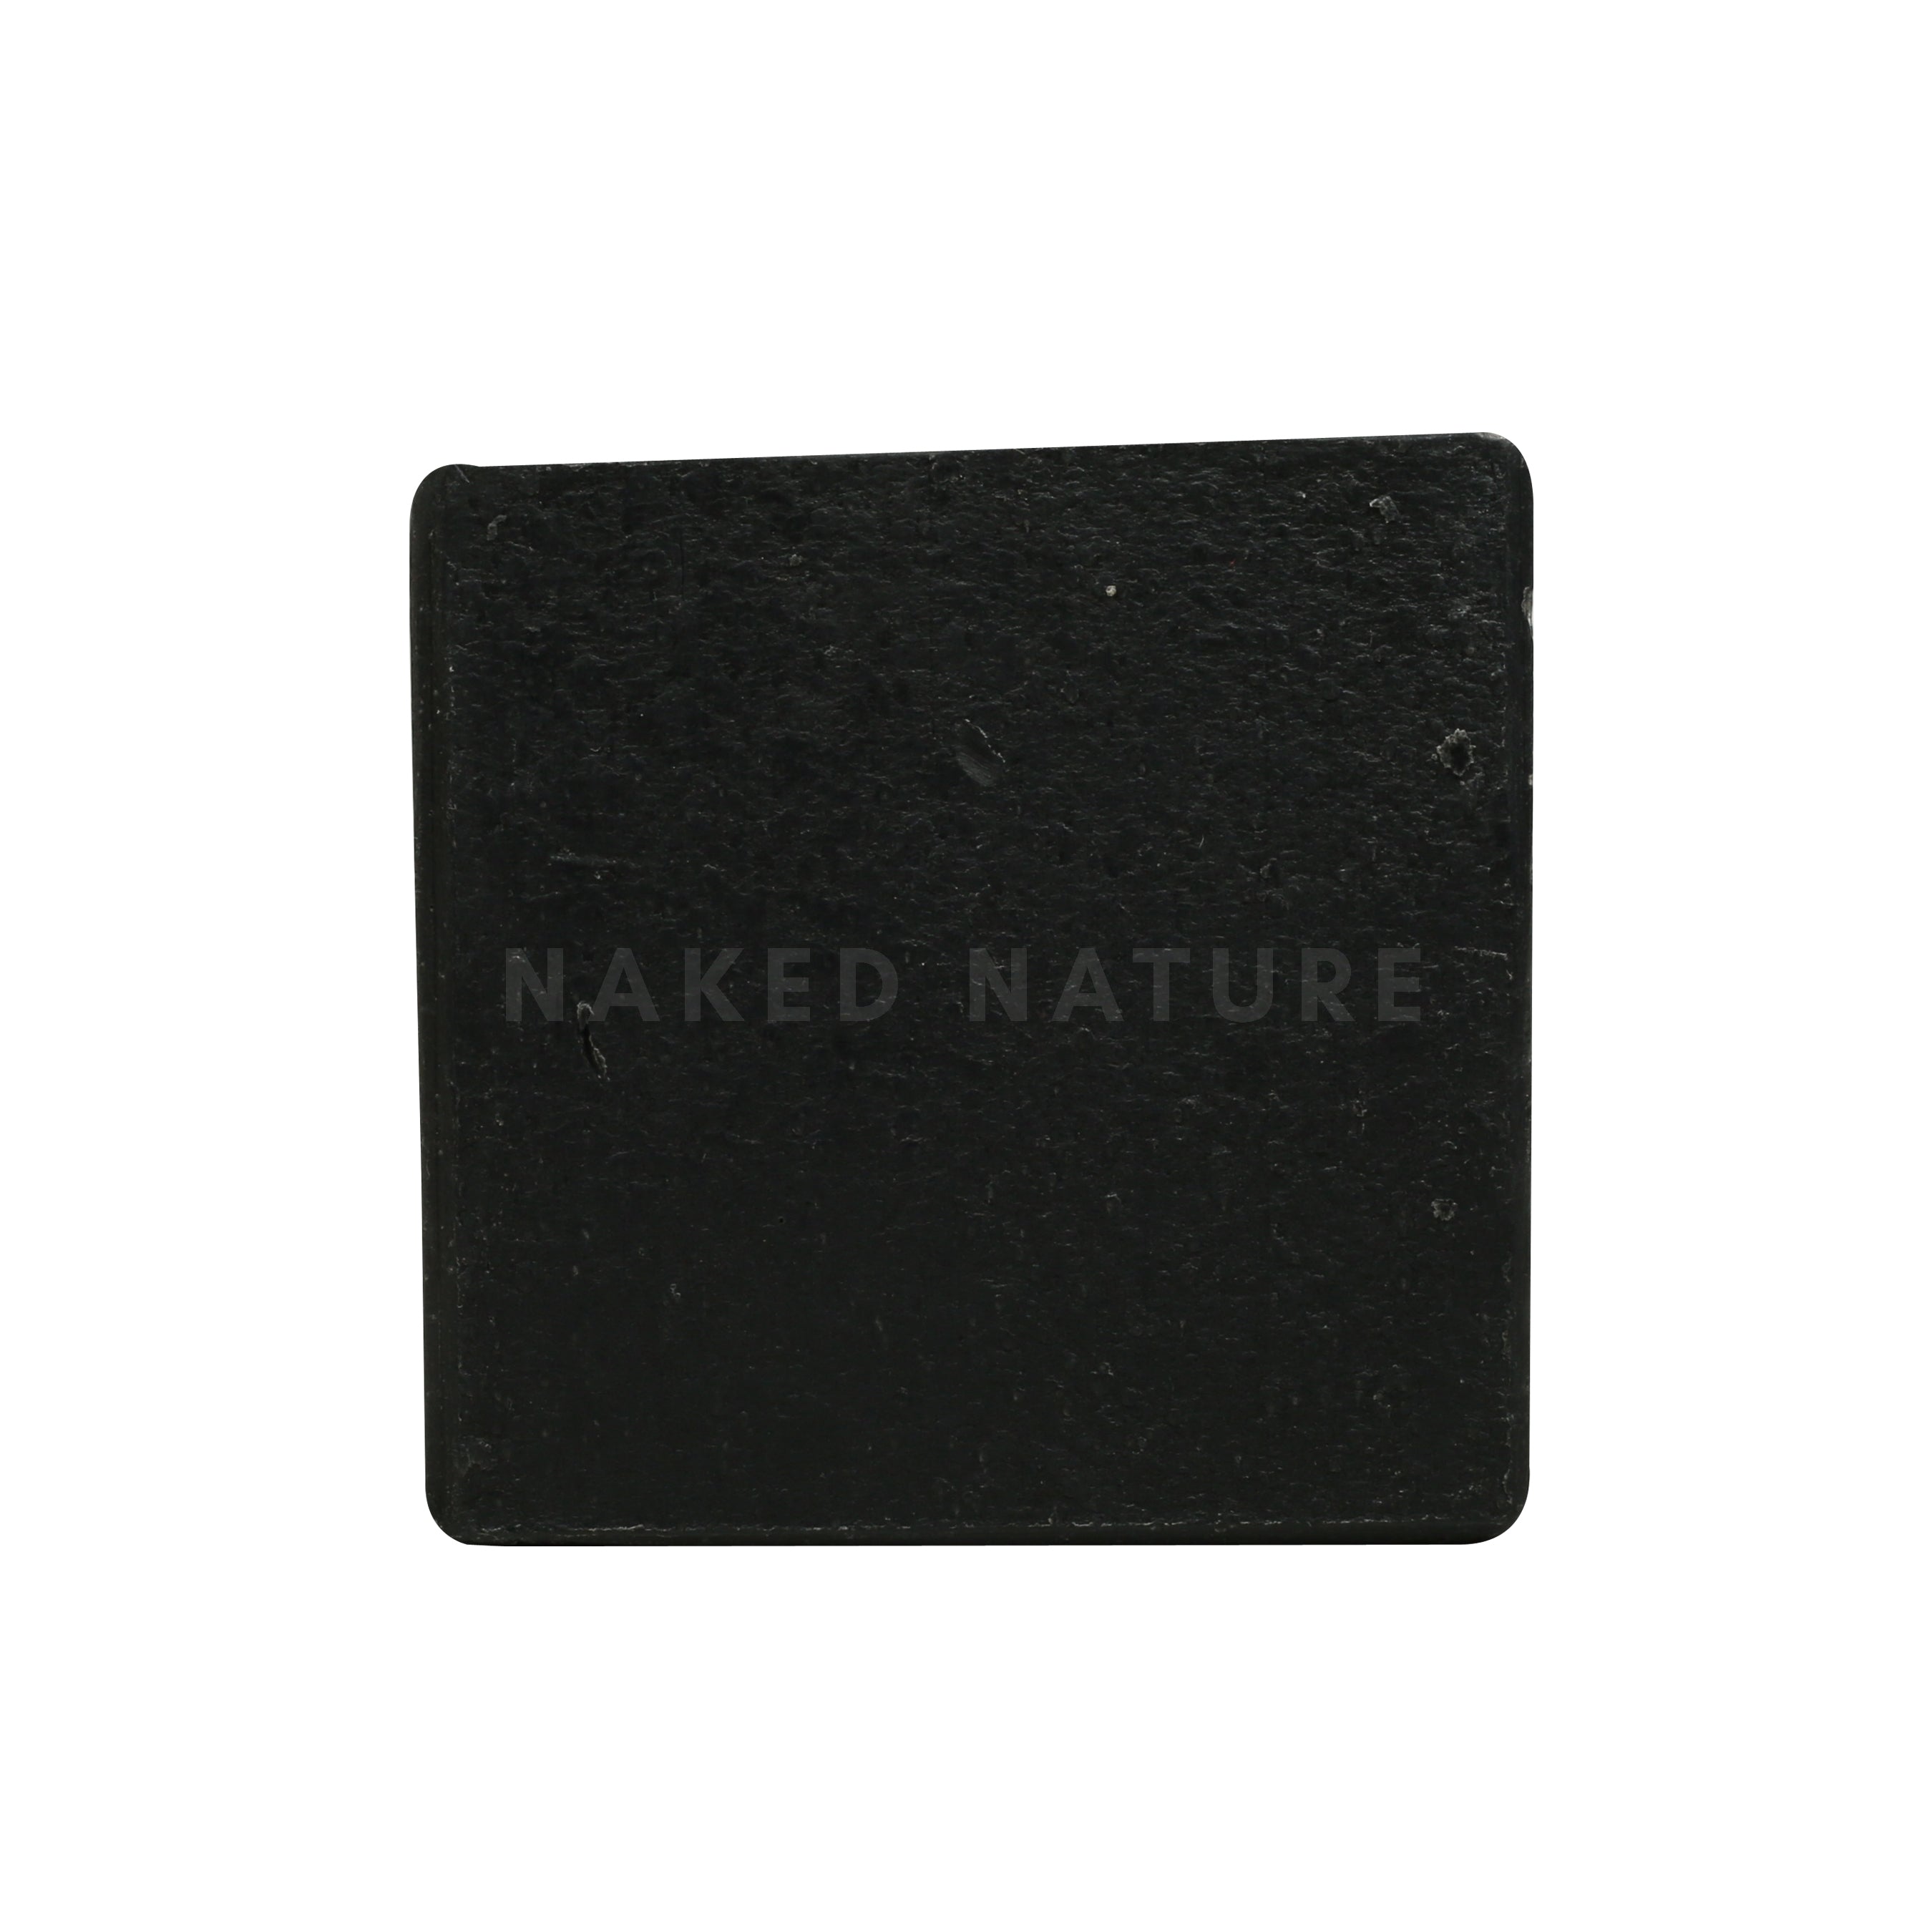 Charcoal Soap (120 g) - For Oily Skin, Removes Skin Dirt and Gives Clear Skin.